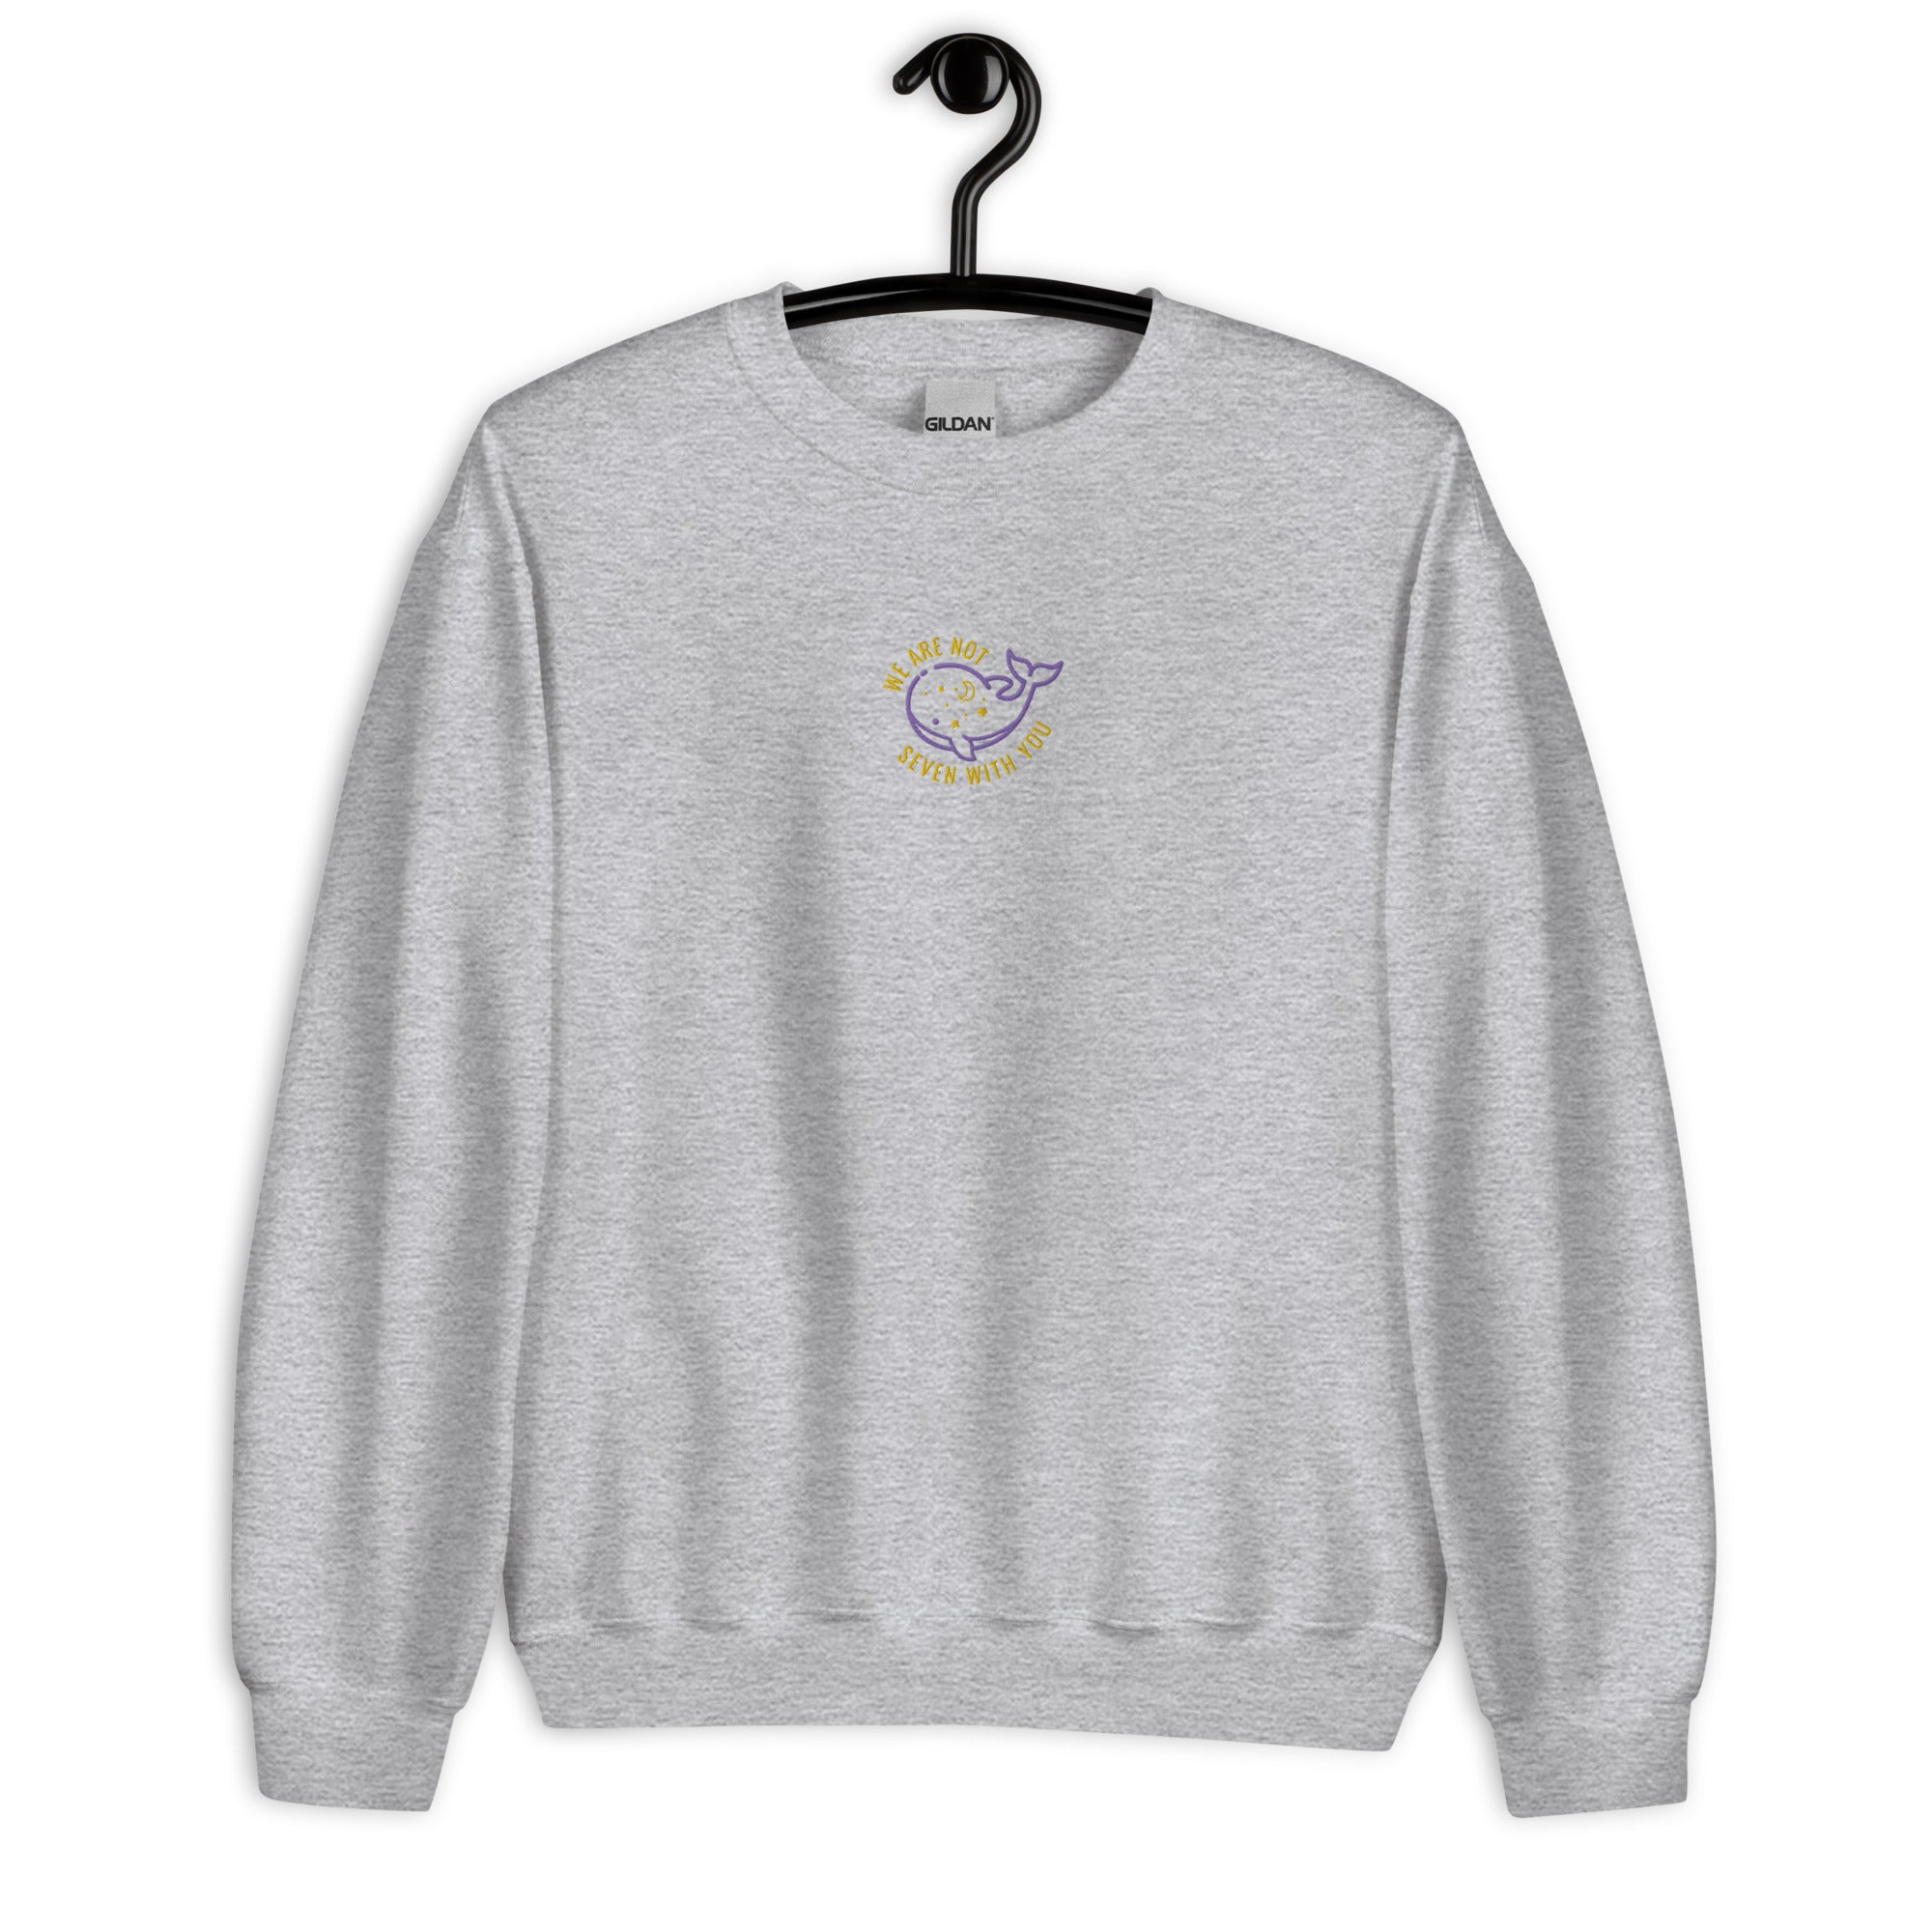 We Are Not Seven With You Embroidered Unisex Sweatshirt